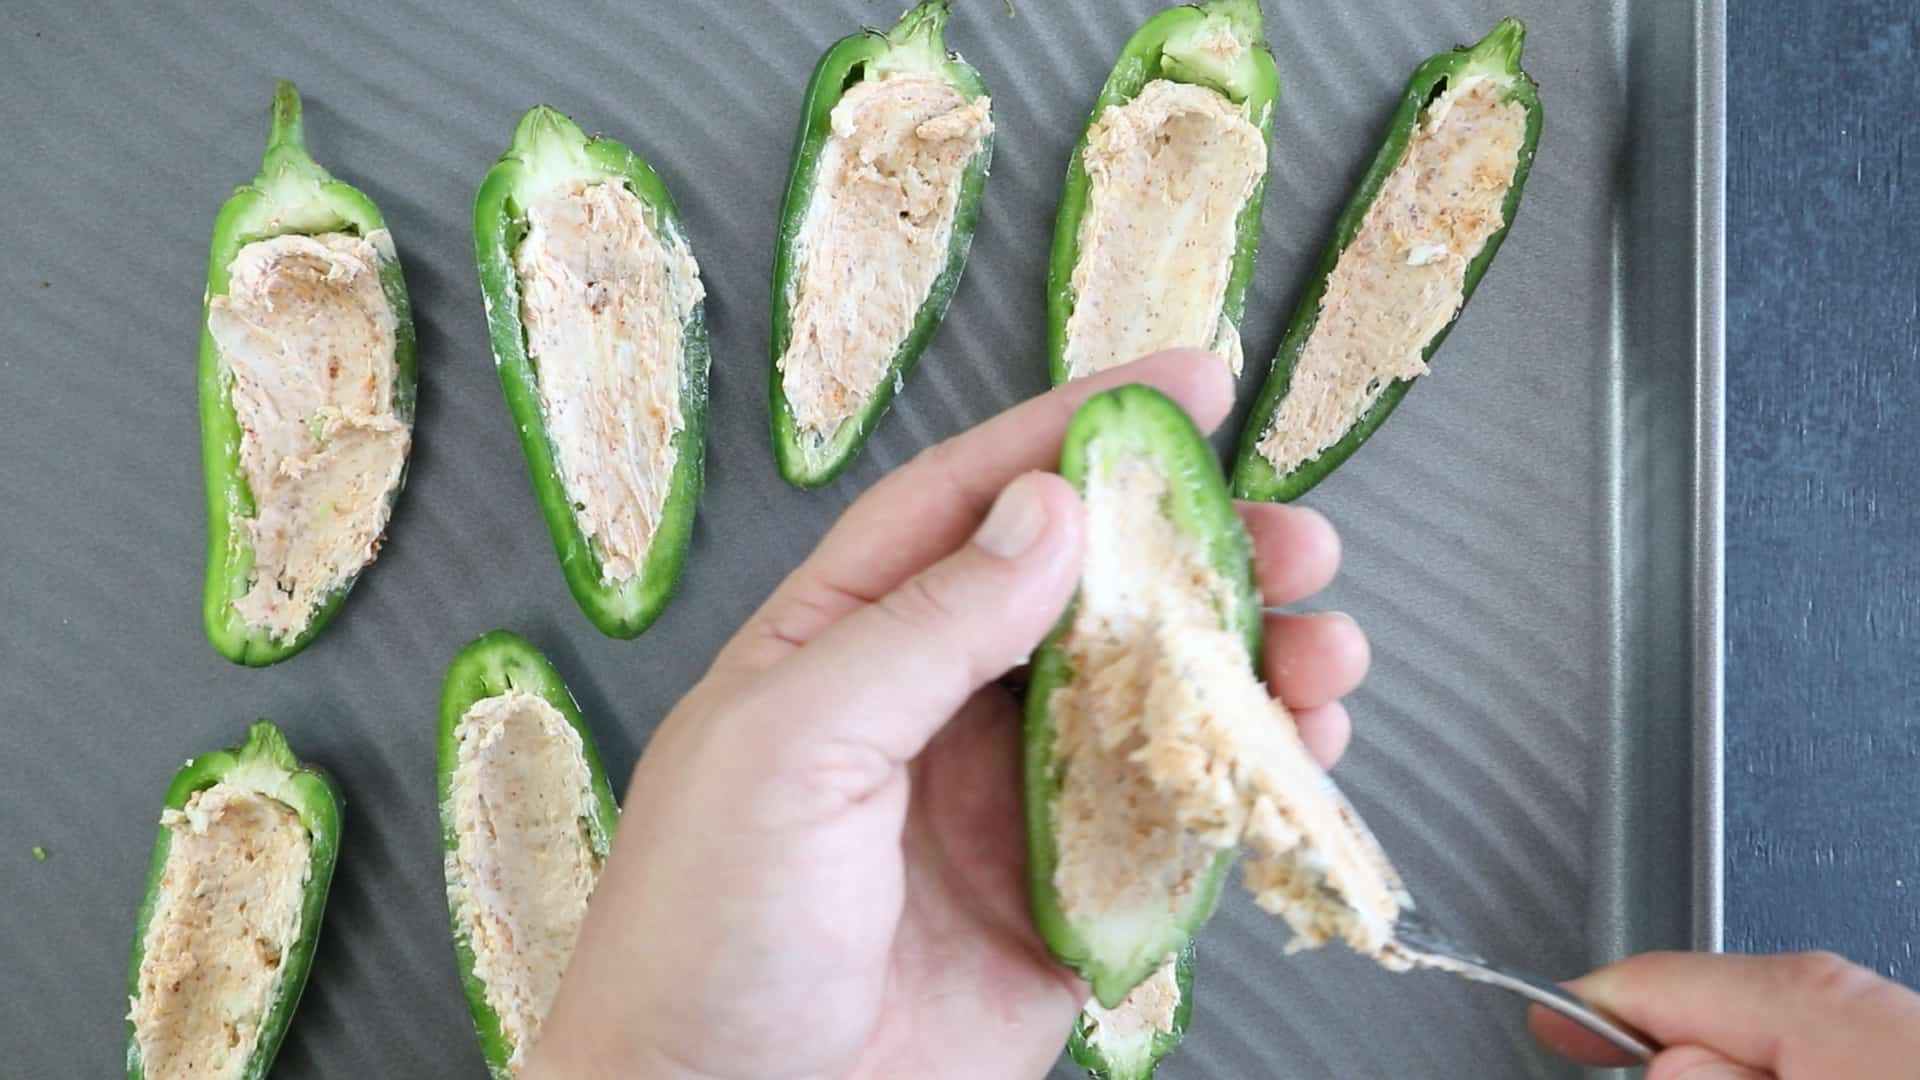 Stuffing the Jalapeno Peppers